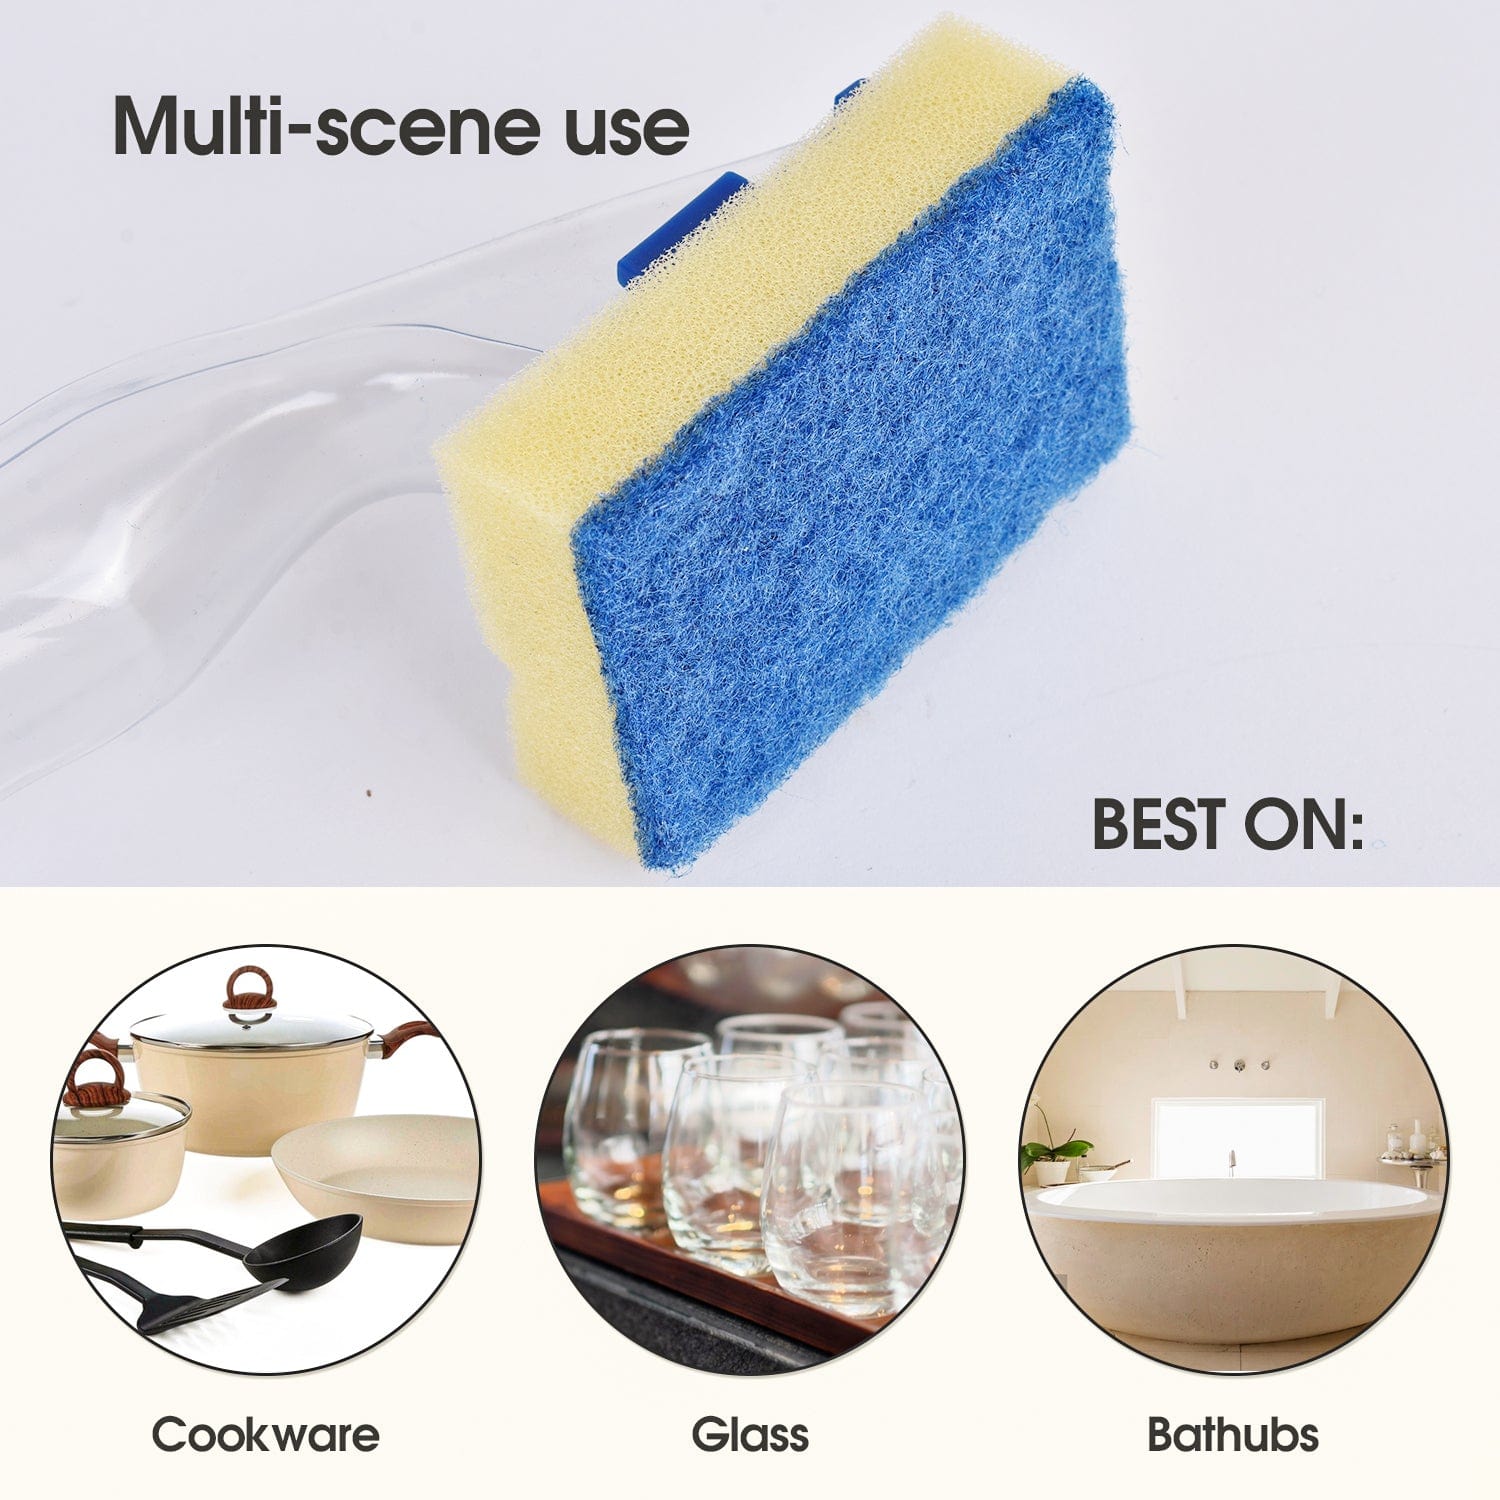 Spiffy cleaning sponge SPIFFY Soap Fillable Dish Wand